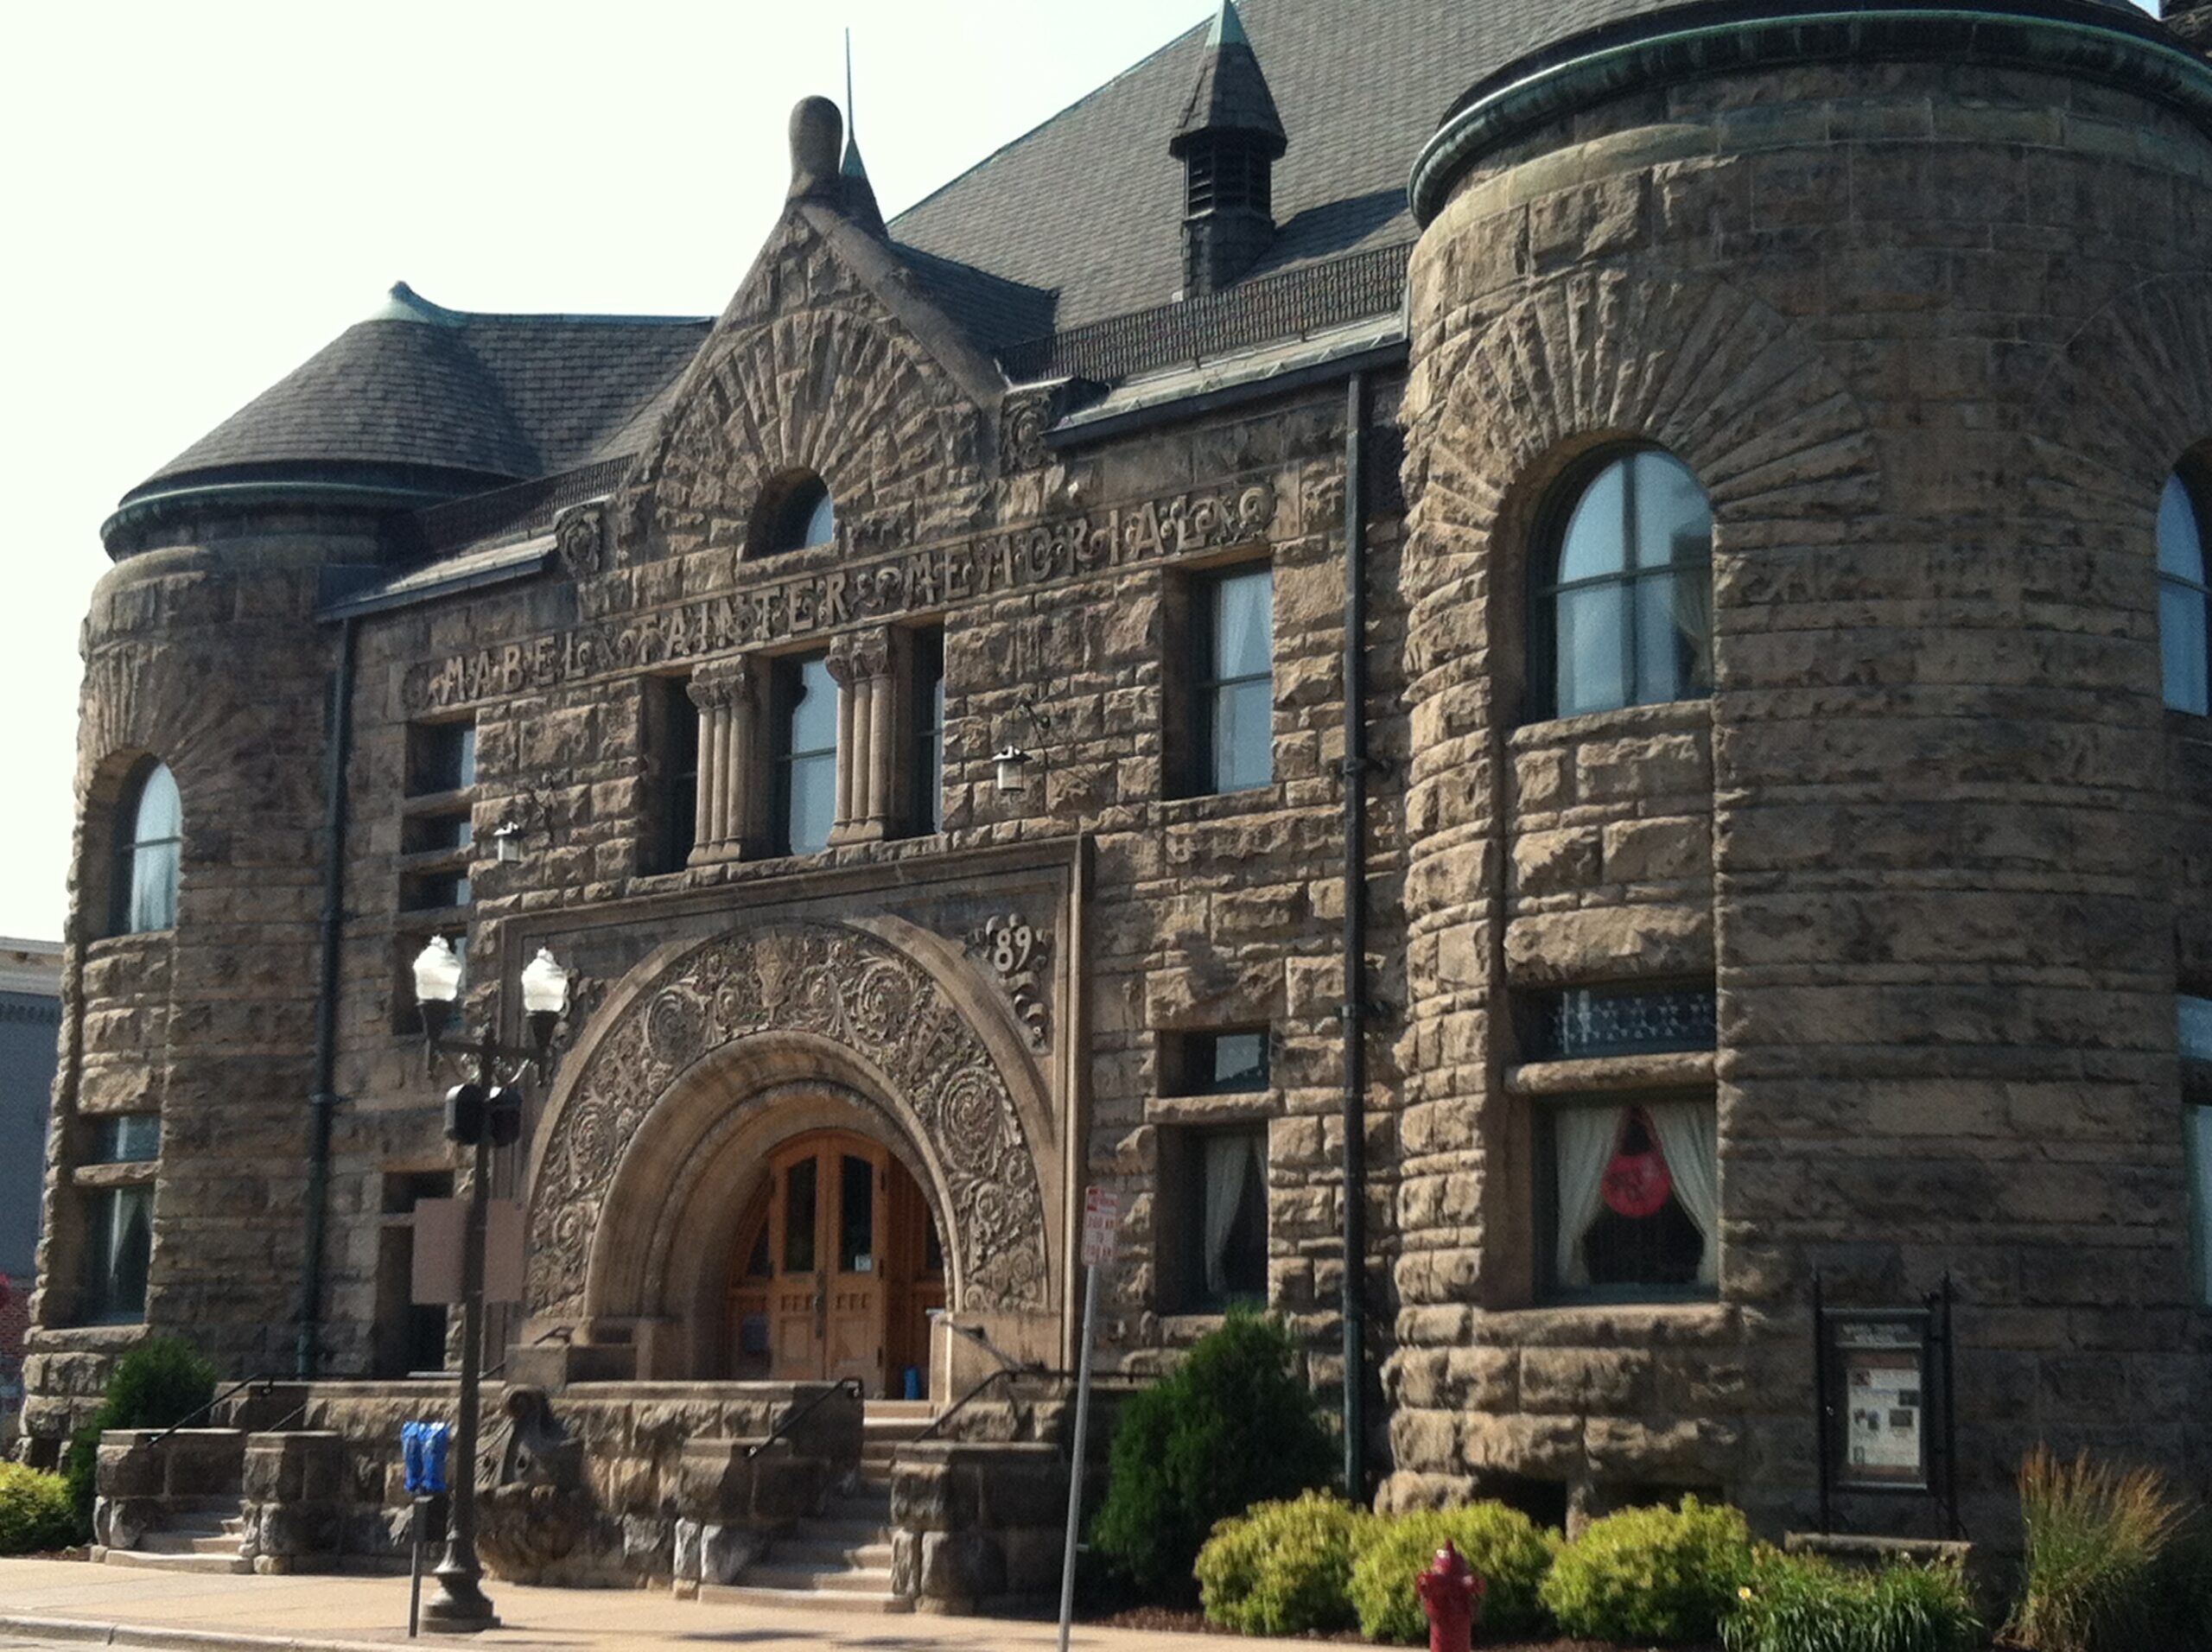 Mabel Tainter Theater. A sandstone building built in the Richardsonian Romanesque architectural style.